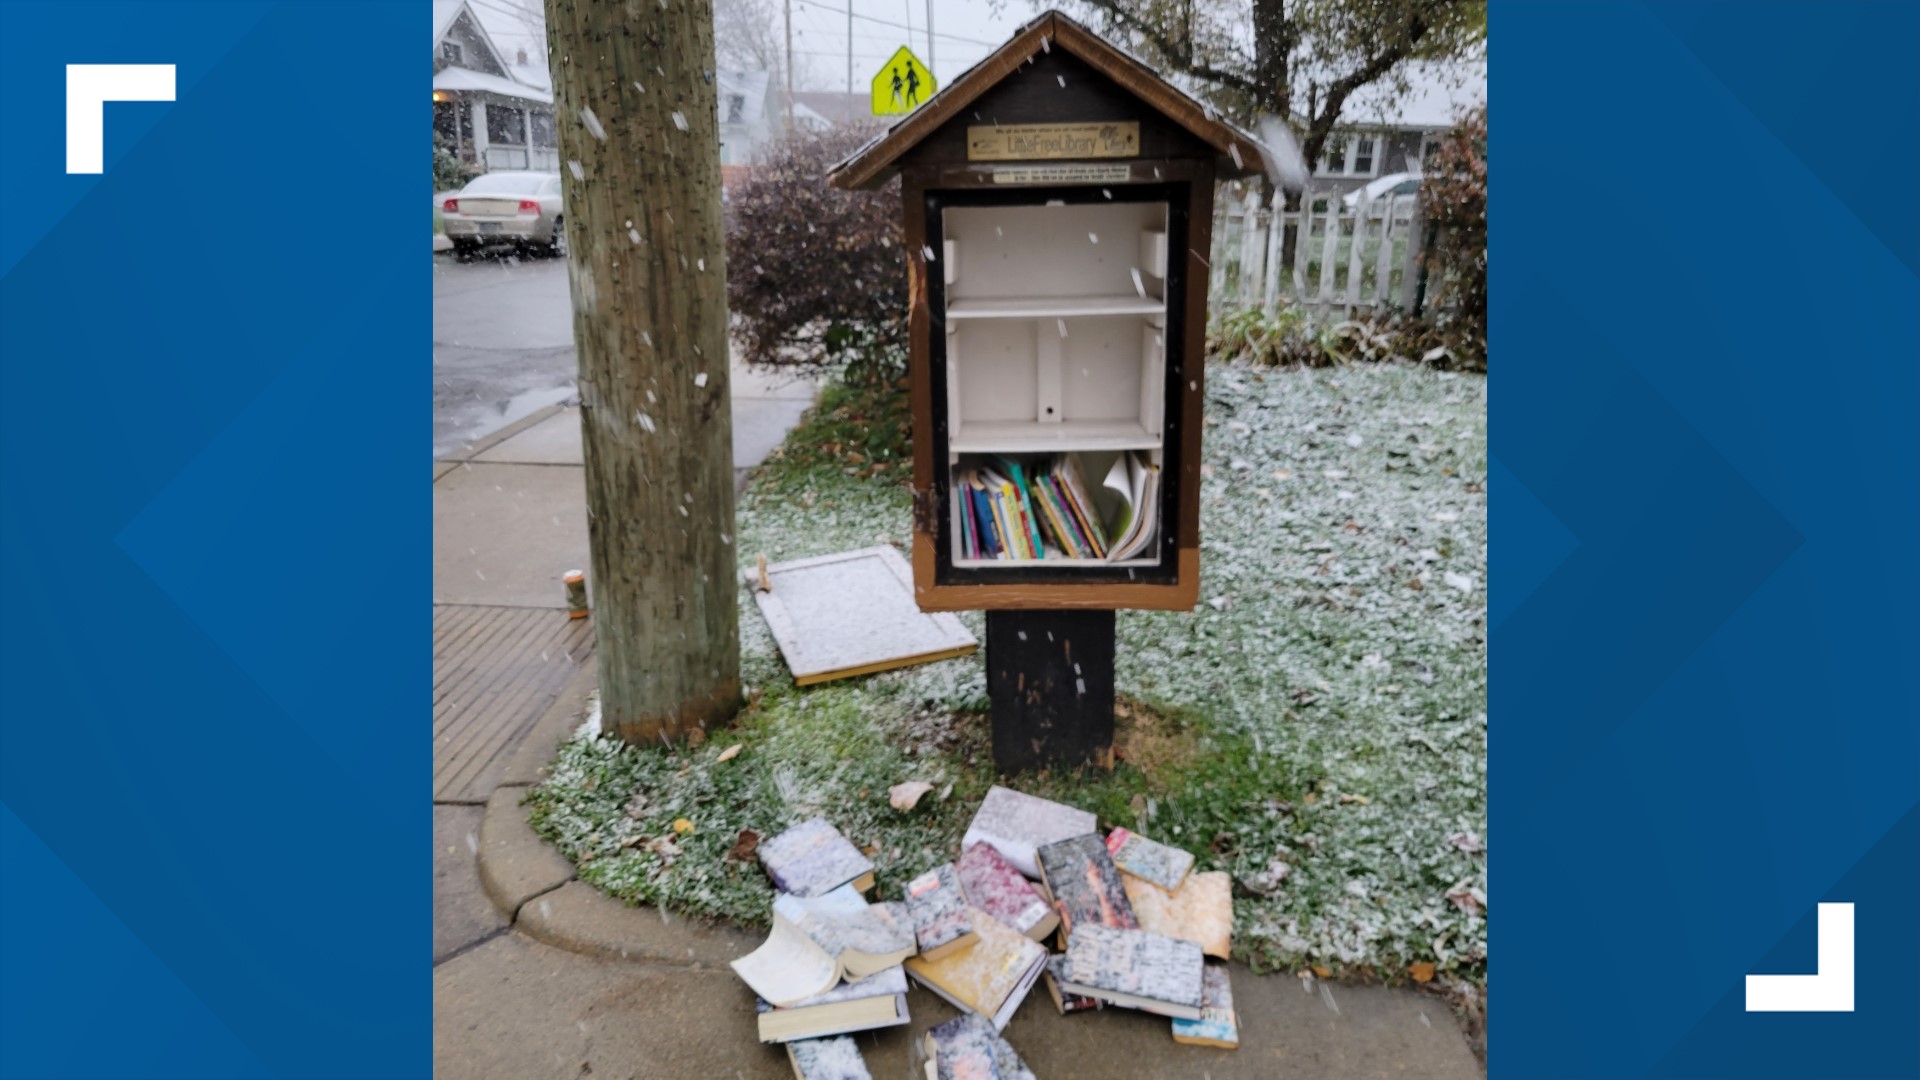 A Little Free Library was vandalized — the door torn off and the bookcase left empty. The owner said vandals hit his little stand several times this past week.